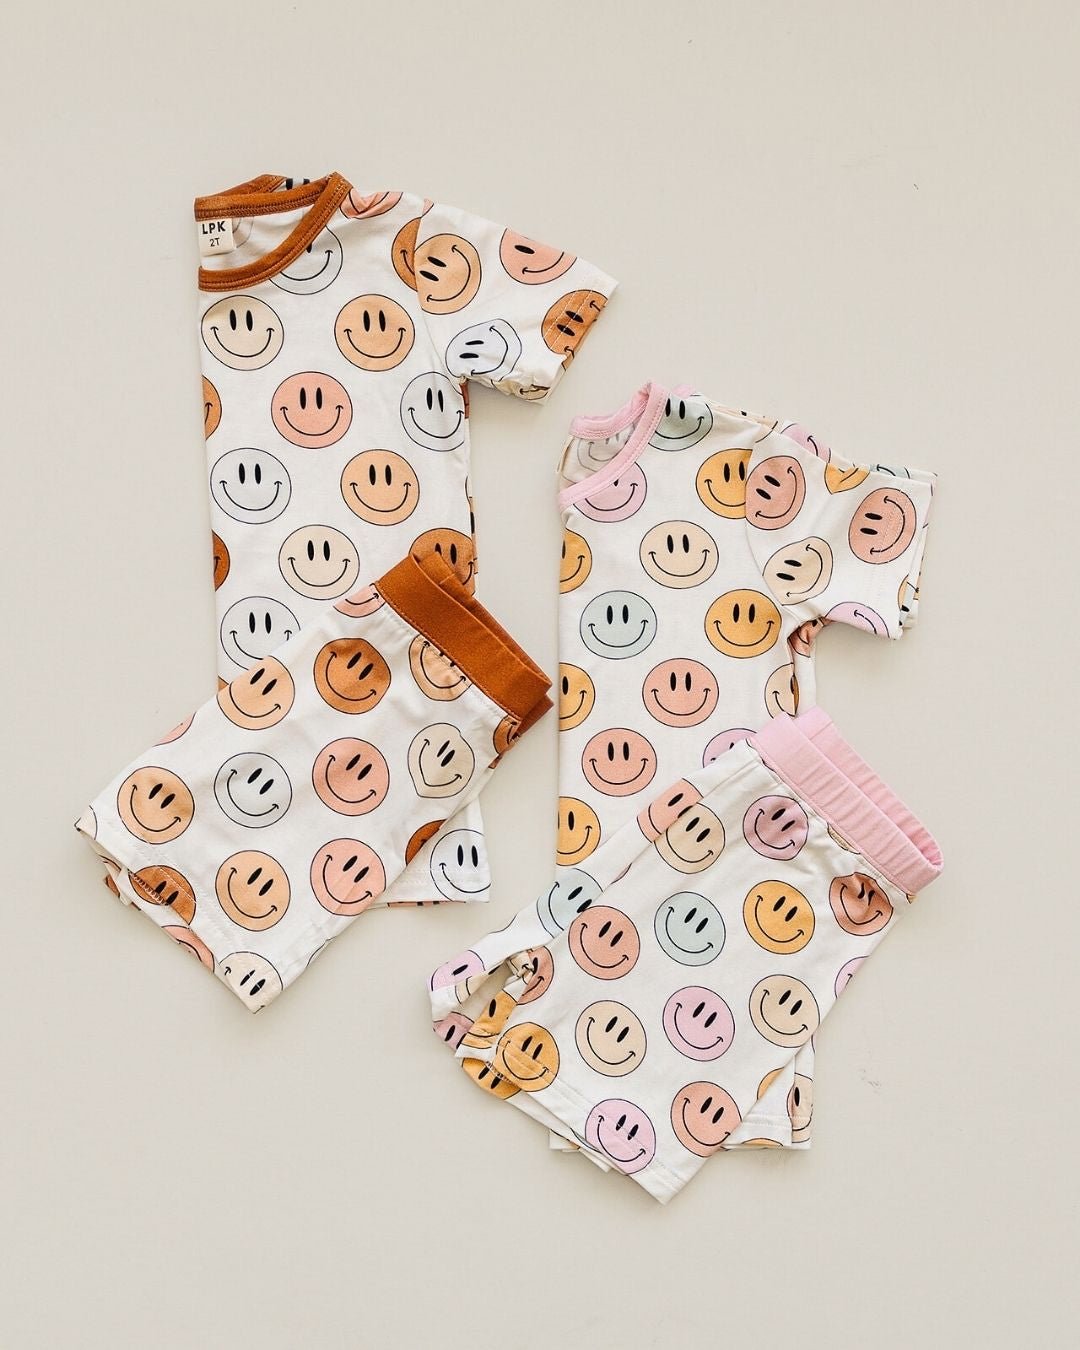 Smiley Bamboo Two Piece Shorts Set | Copper